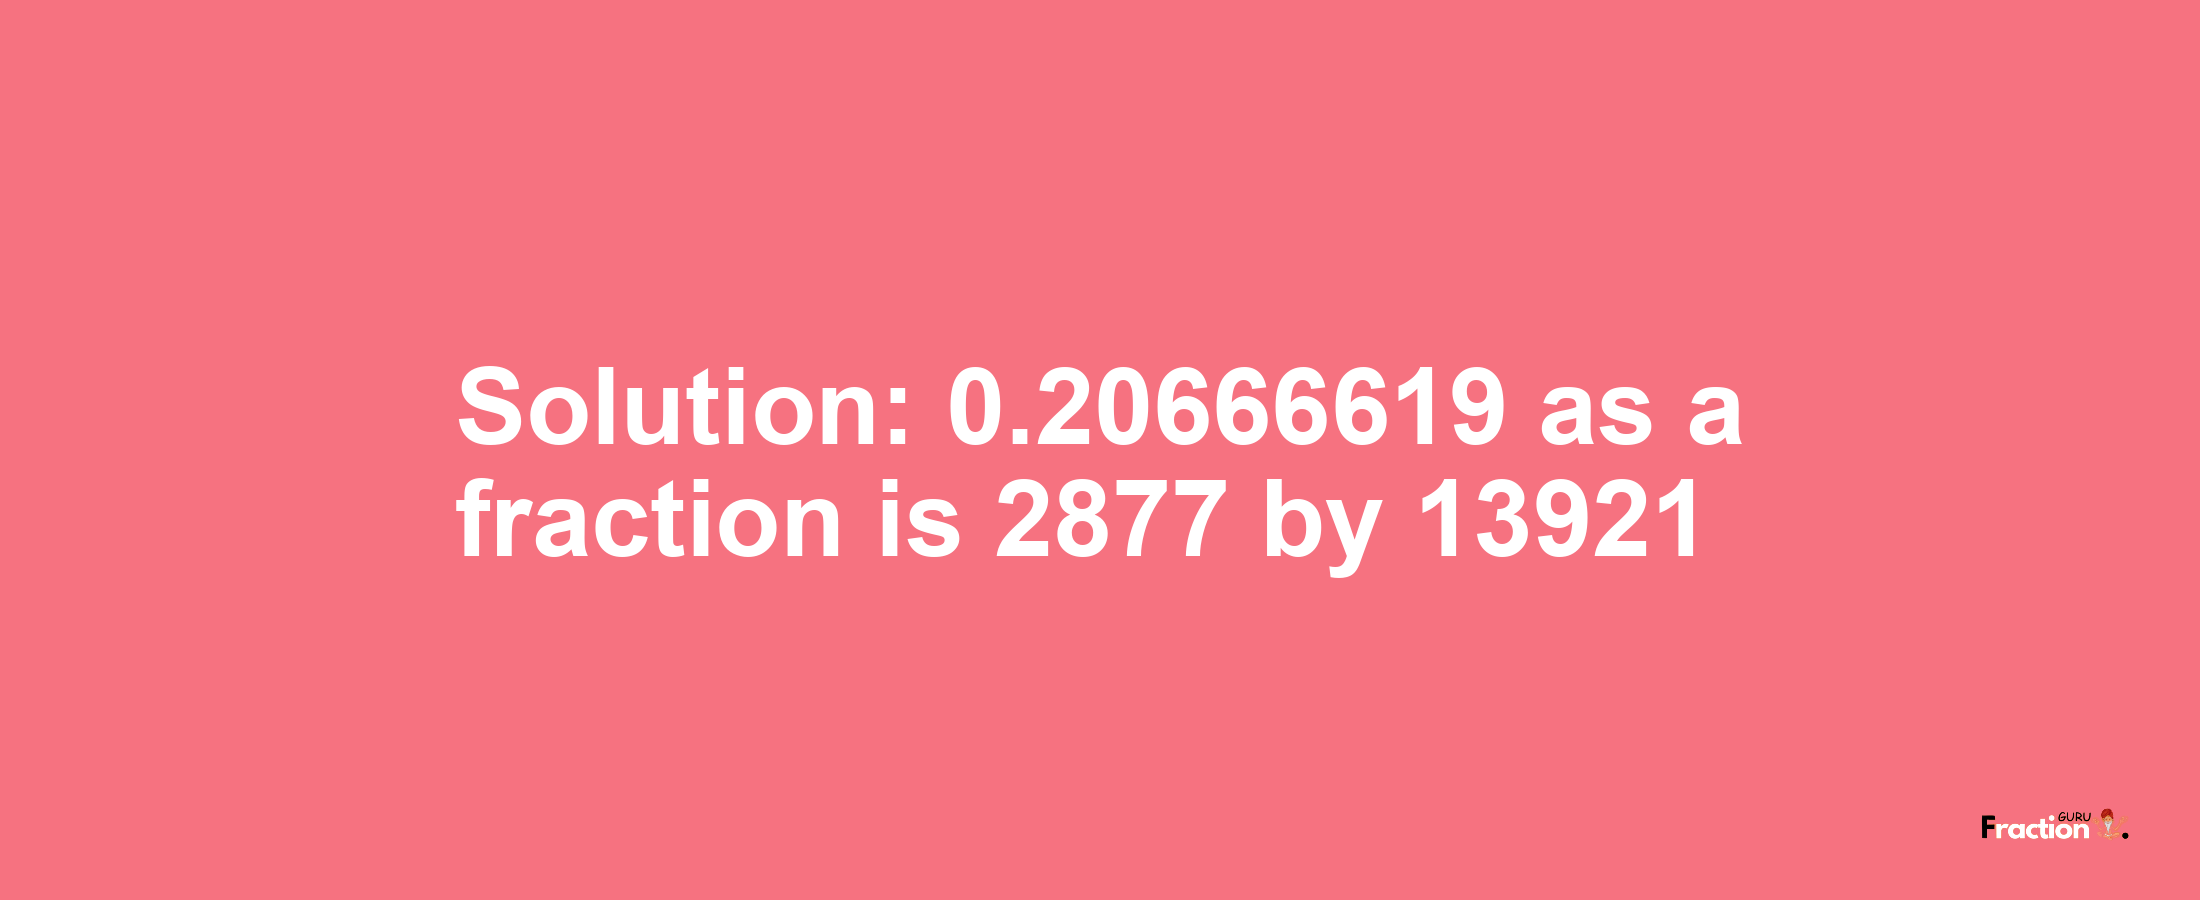 Solution:0.20666619 as a fraction is 2877/13921